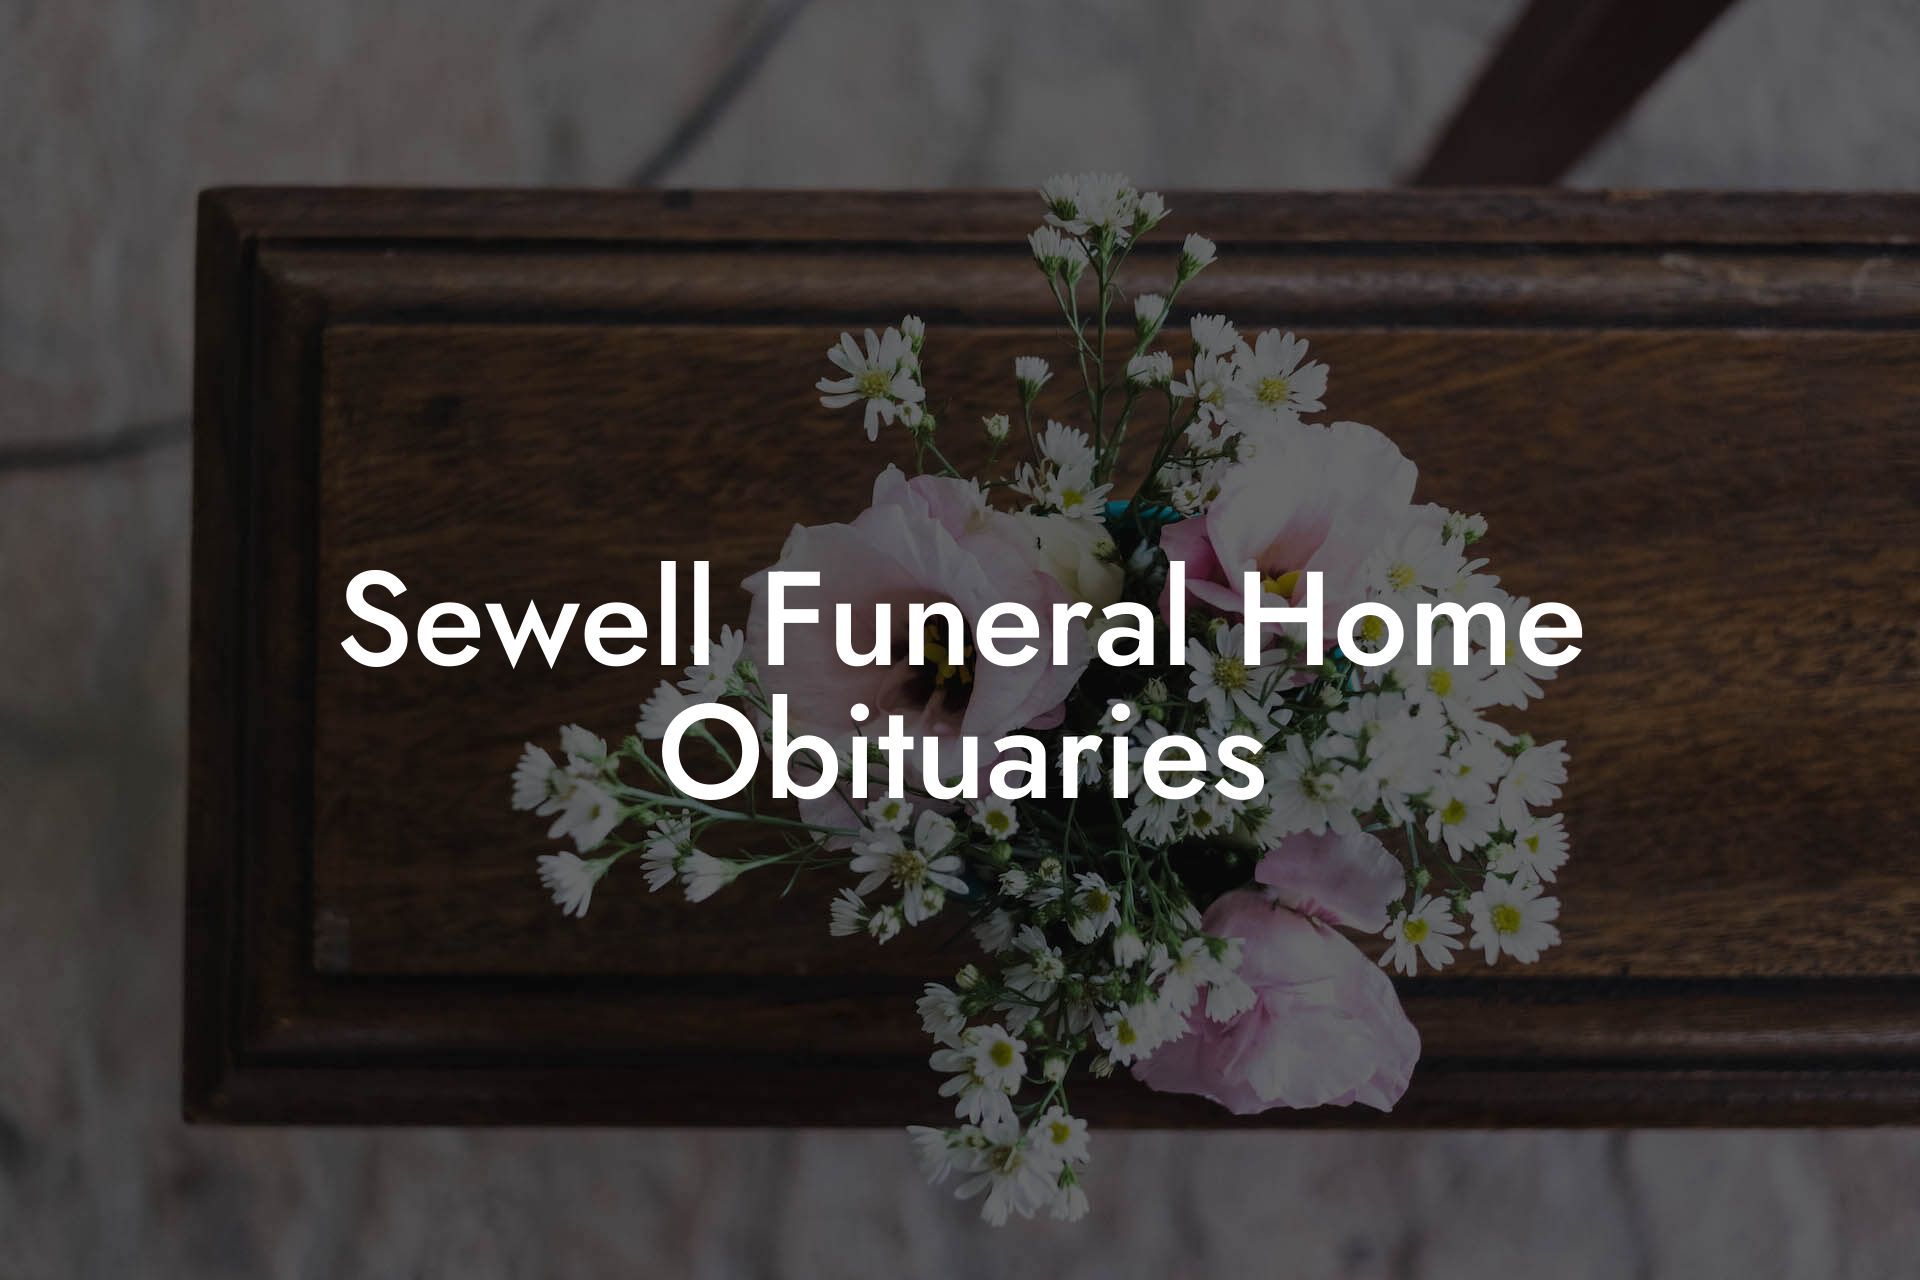 Sewell Funeral Home Obituaries